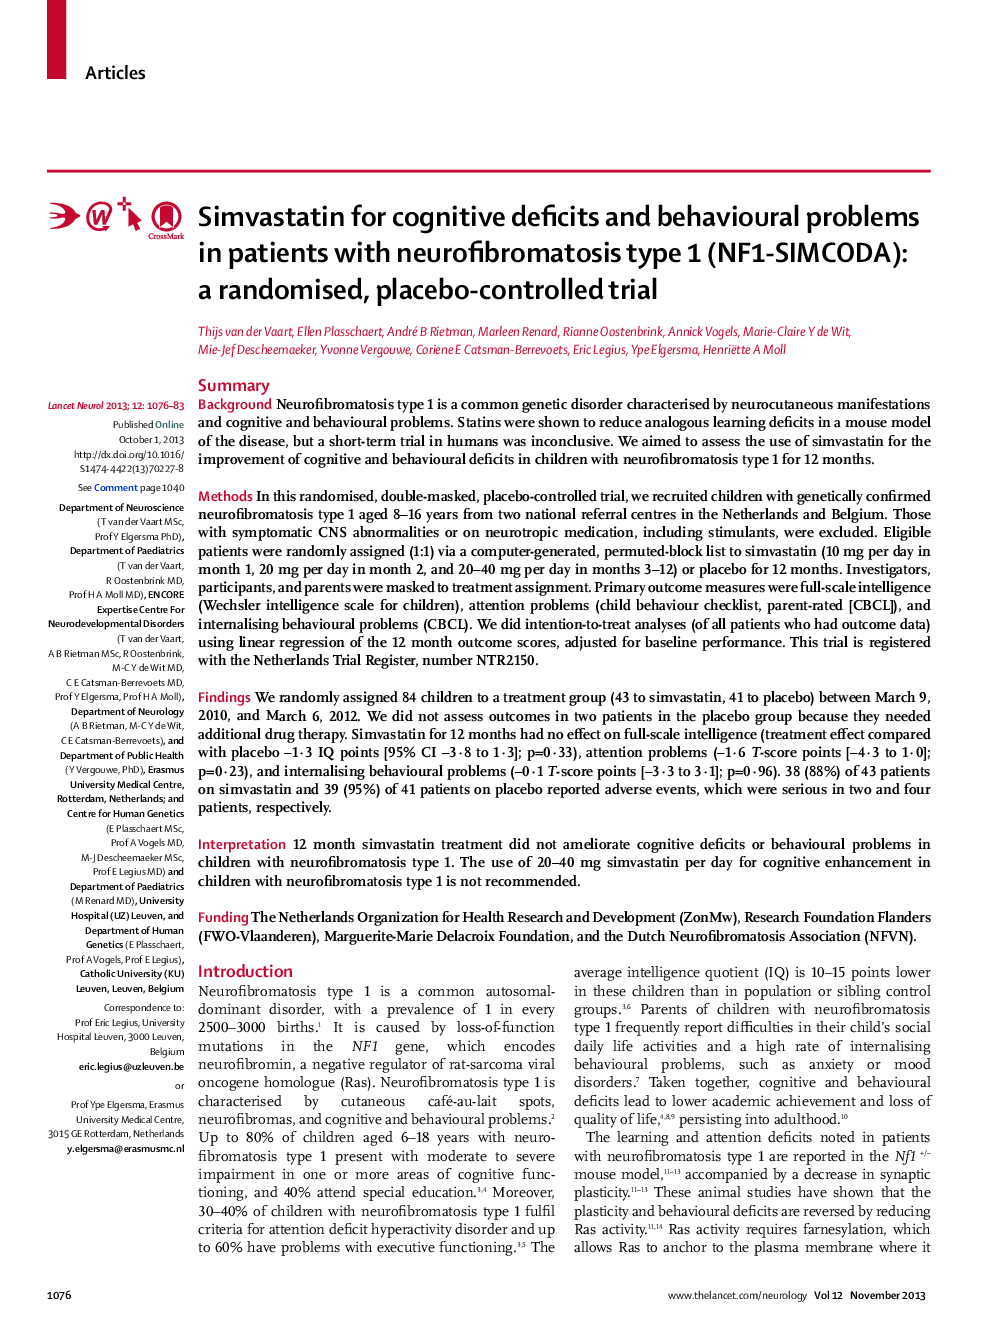 Simvastatin for cognitive deficits and behavioural problems in patients with neurofibromatosis type 1 (NF1-SIMCODA): a randomised, placebo-controlled trial